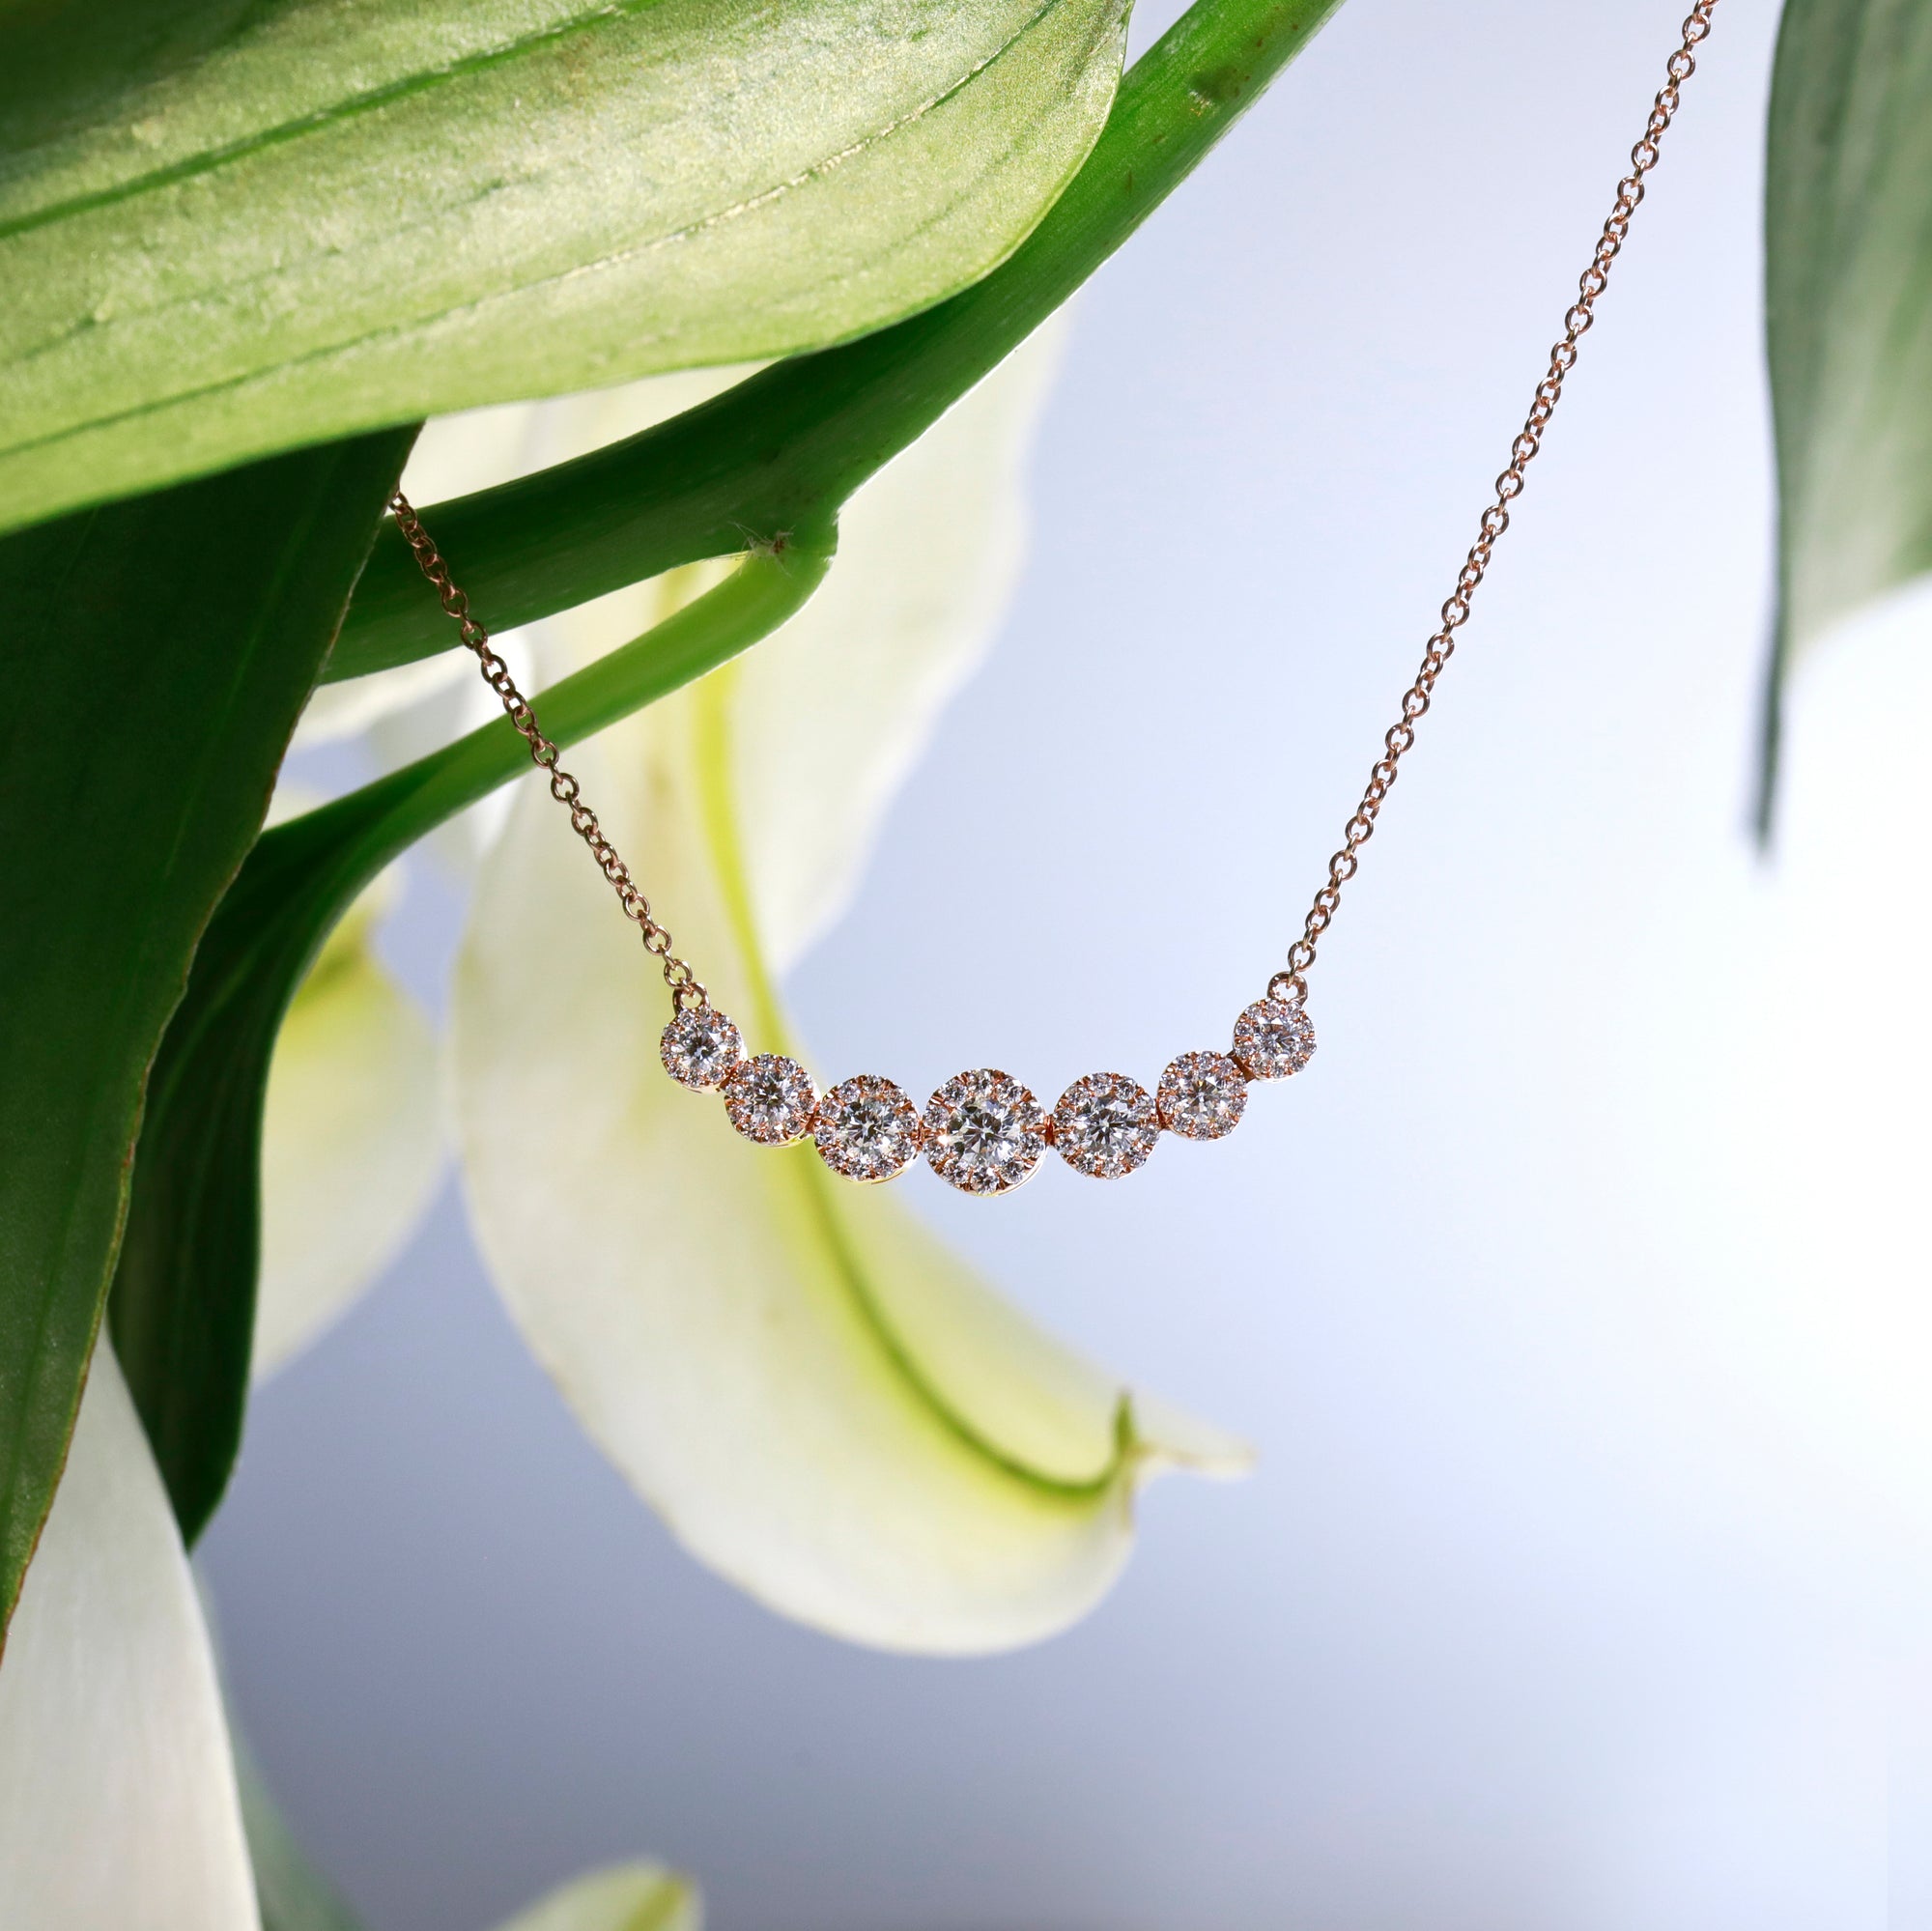 16-inch 14K rose gold diamond necklace featuring 7 round brilliant diamonds with halos set in a graduated design. Diamonds weigh a total of 0.71 carats.